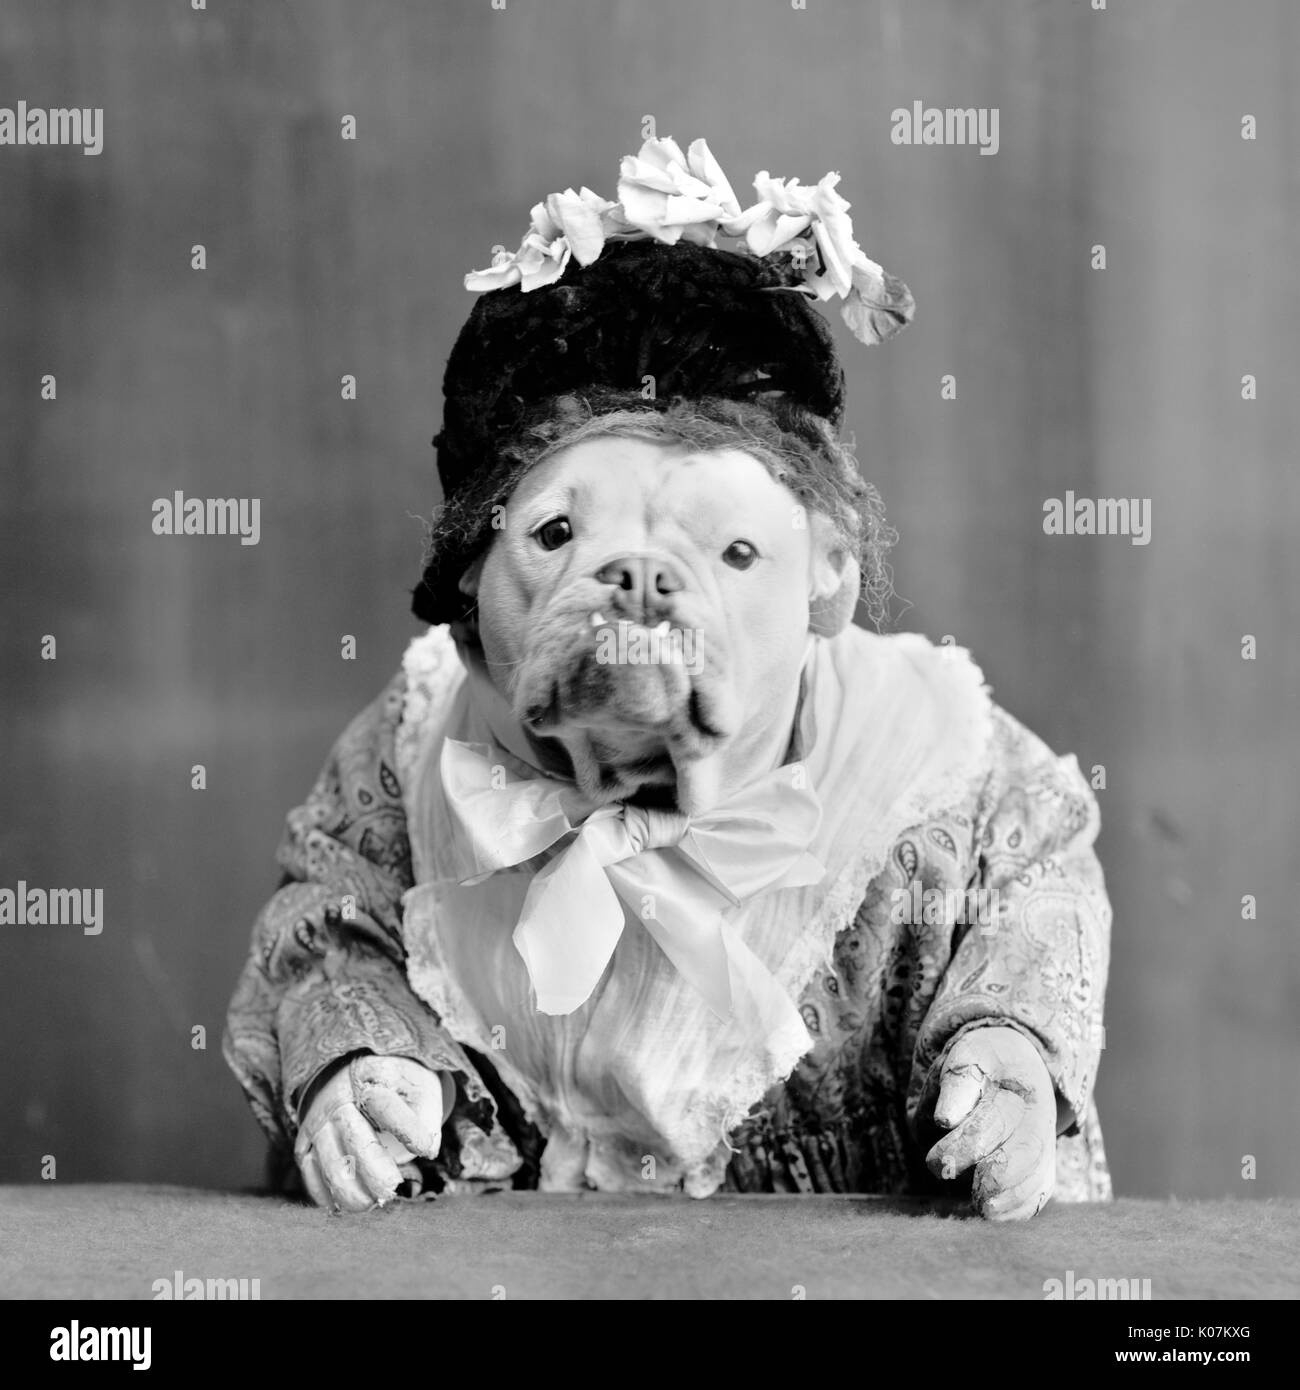 Dog dressed in human clothing Stock Photo